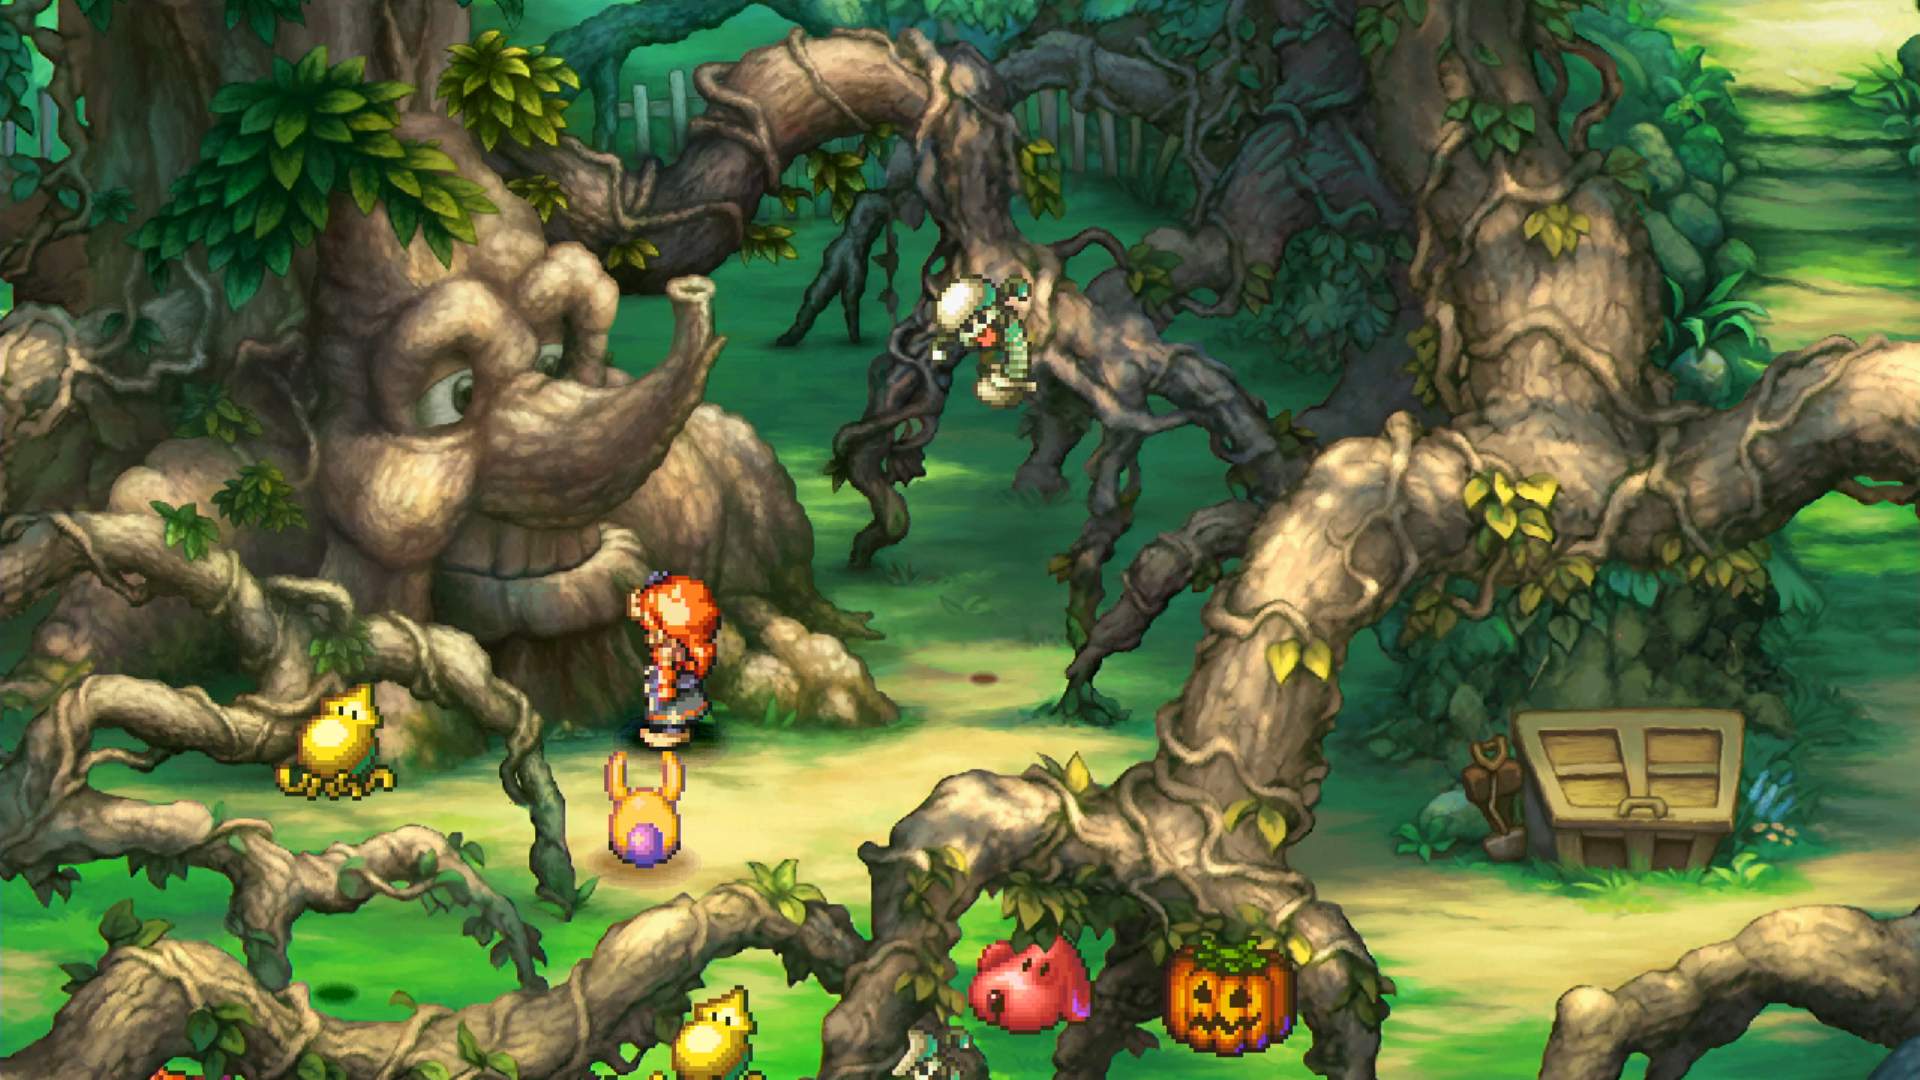 The Legend of Mana hero is standing in the Mana Orchard, in front of Trent.